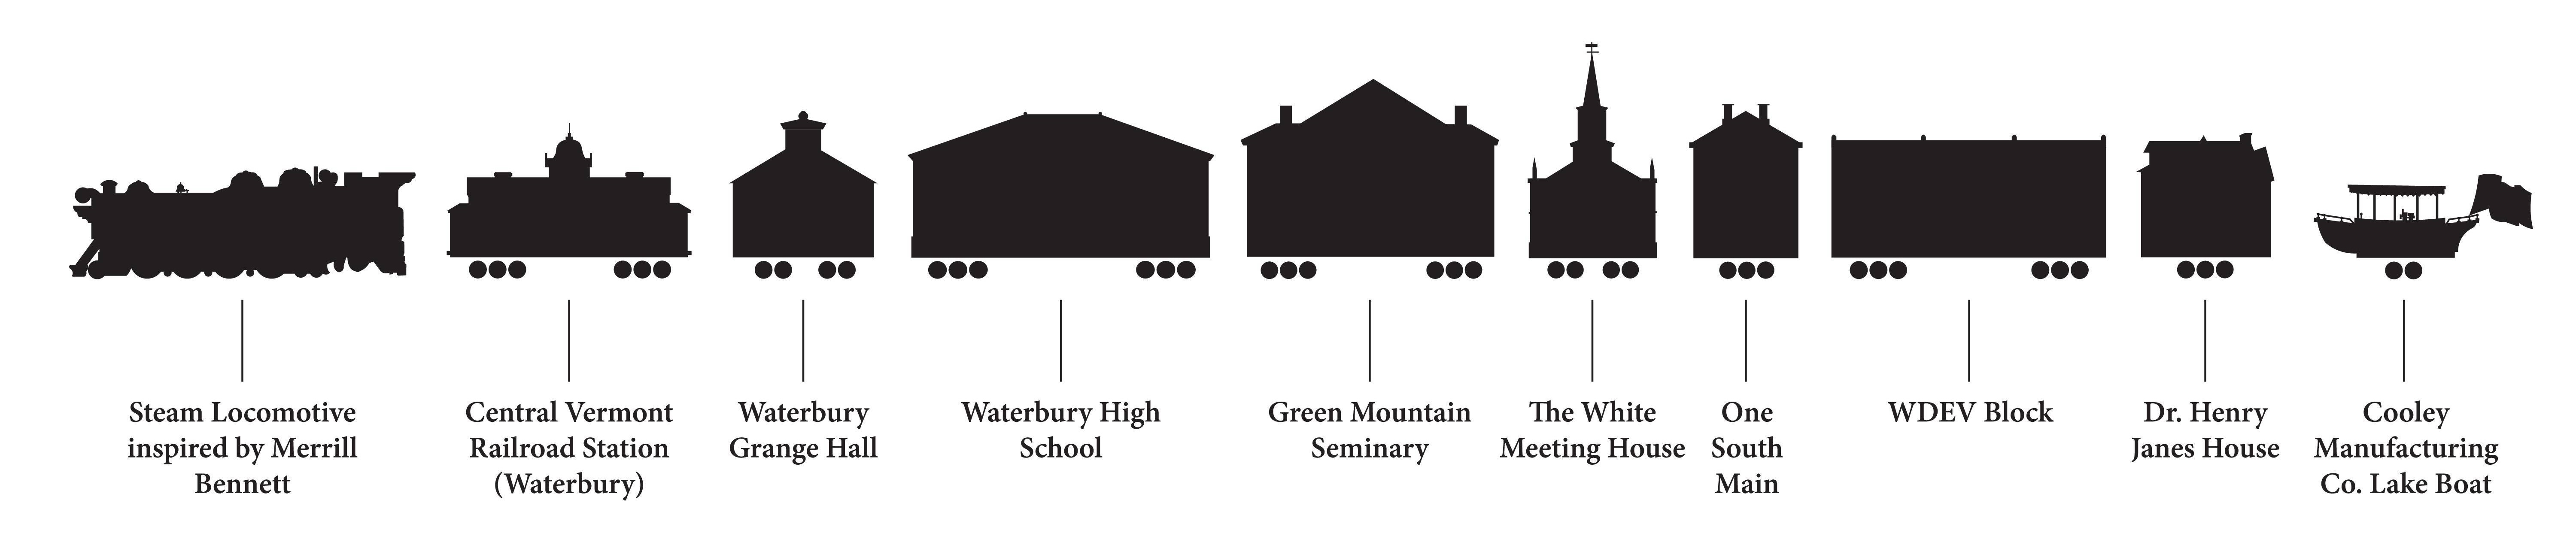 A graphic identifying the buildings and components depicted in the Waterbury Special Rail Art